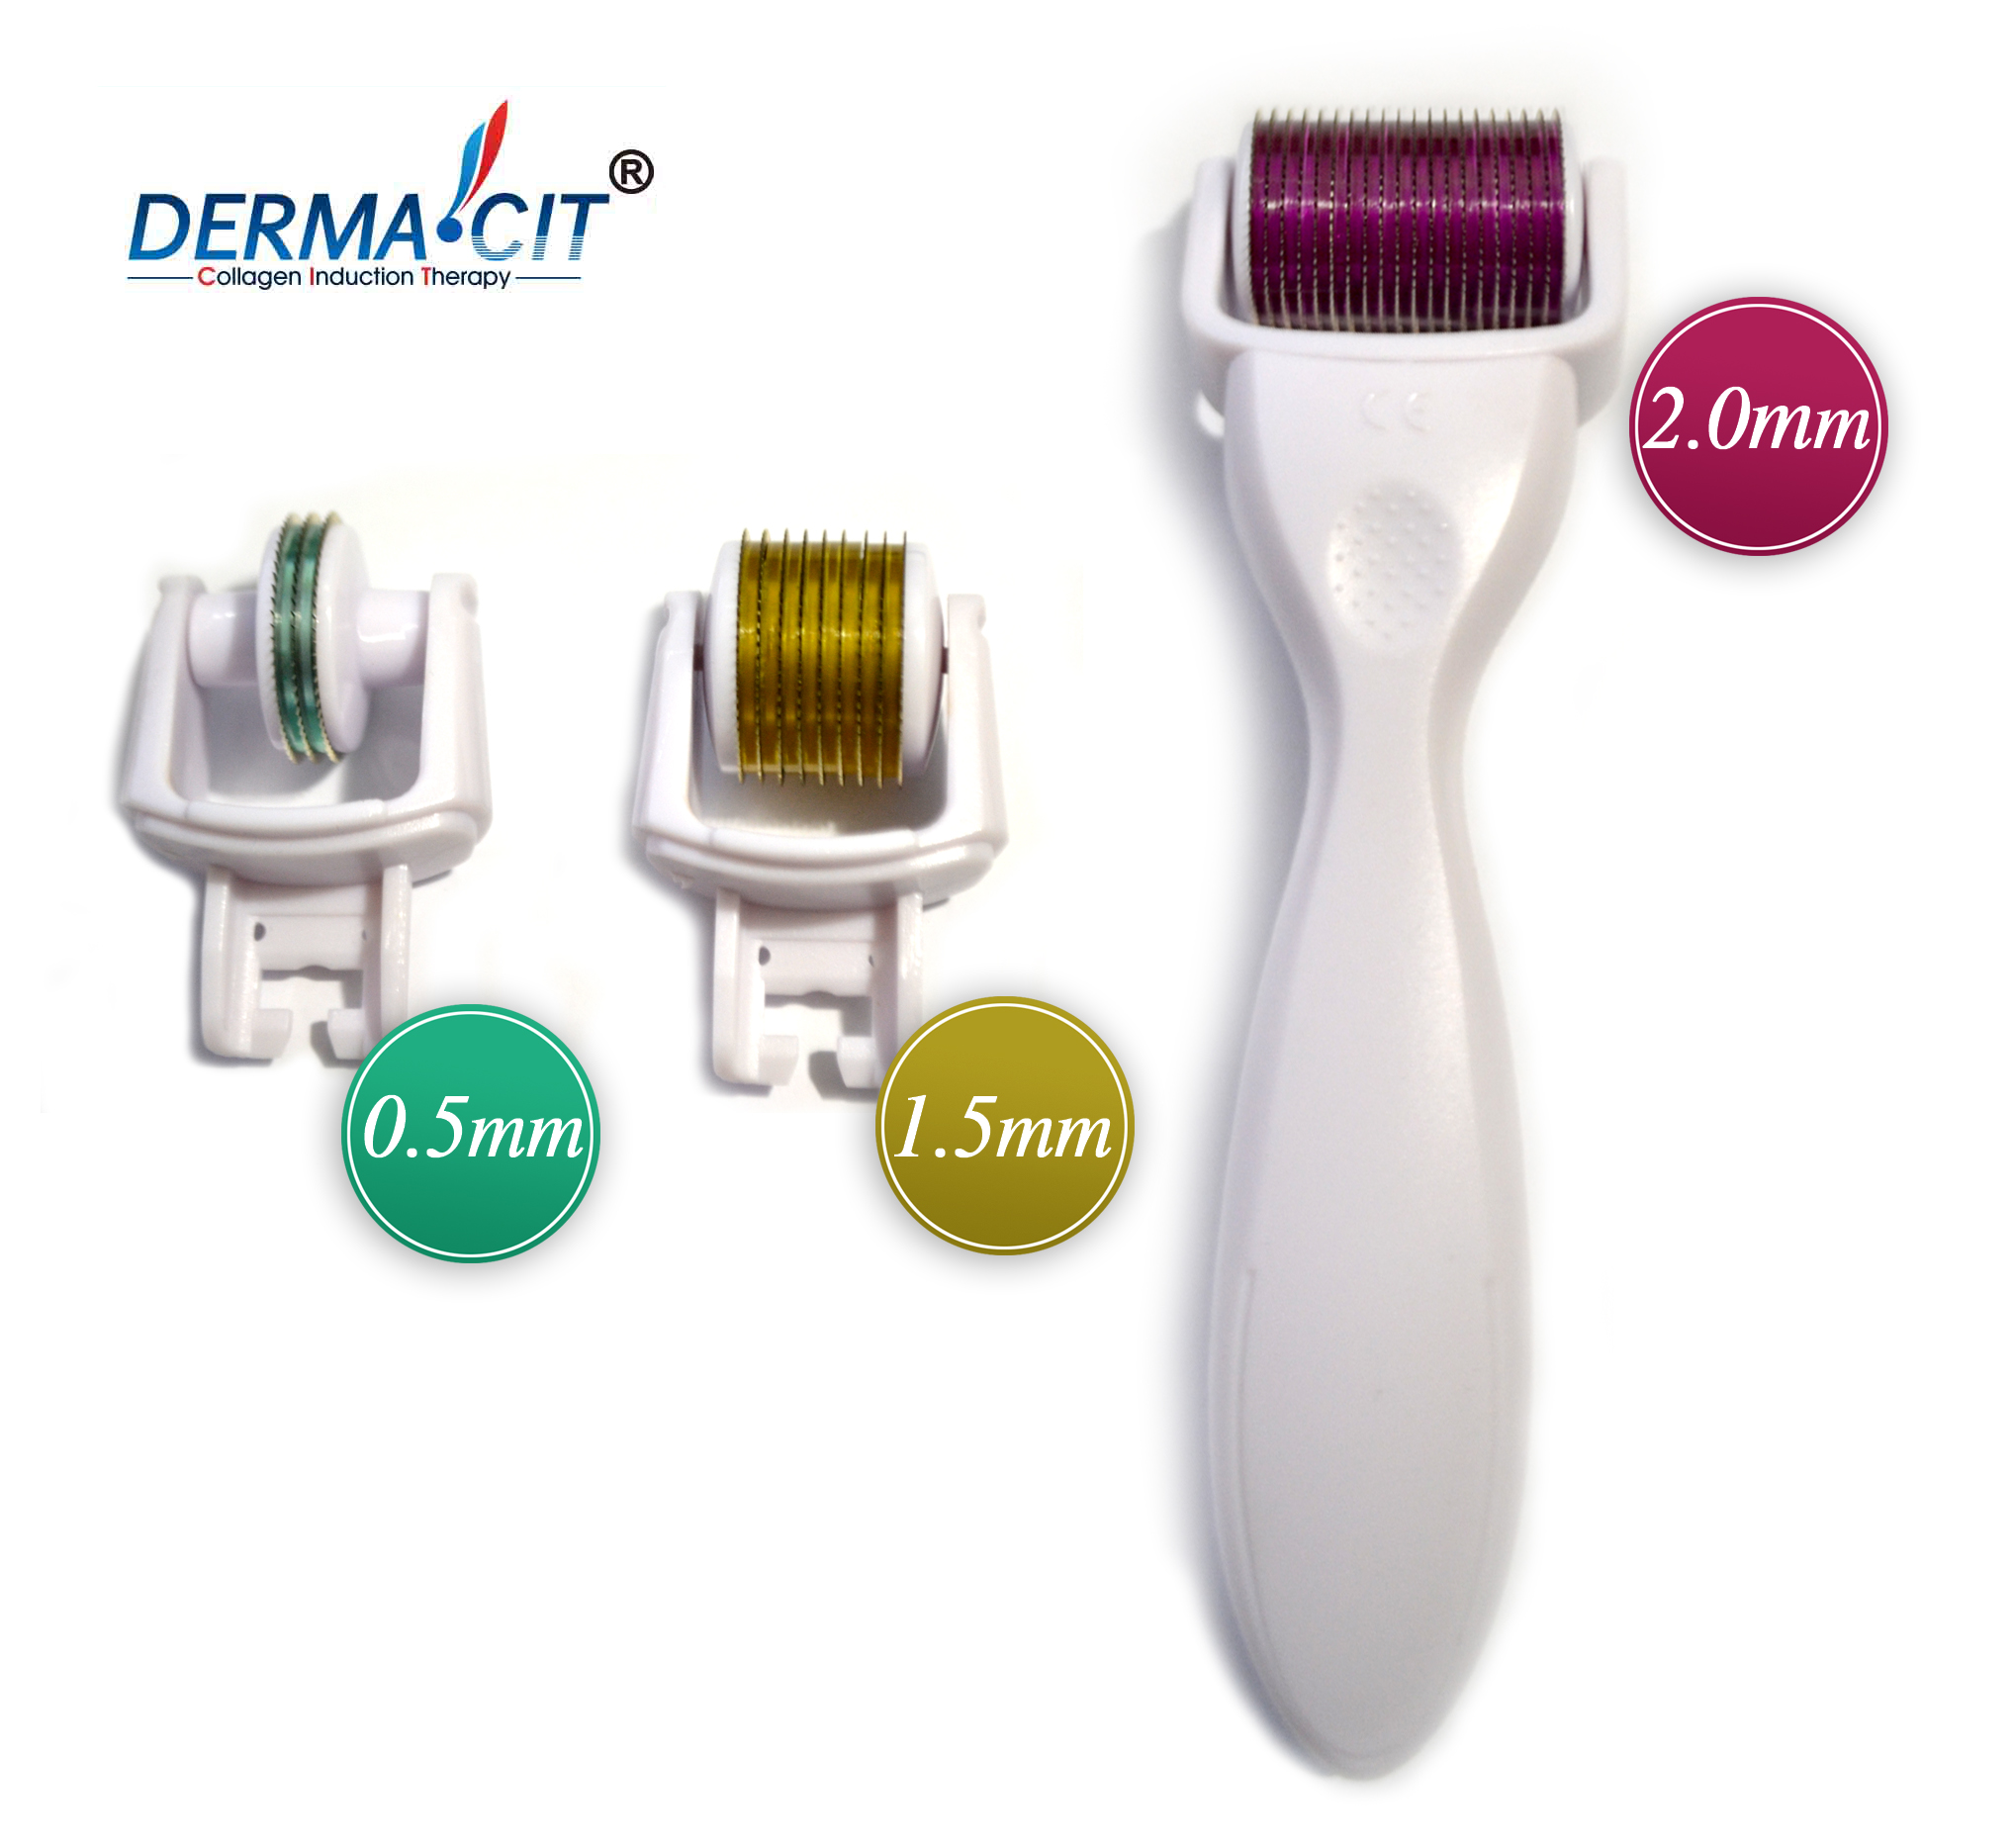 DERMA-CIT 3-In-1  Derma Roller Titanium Micro Needle Skin Care Kit (3 Separate Roller Heads (0.5mm 1.5mm and 2.0mm) - image 1 of 8